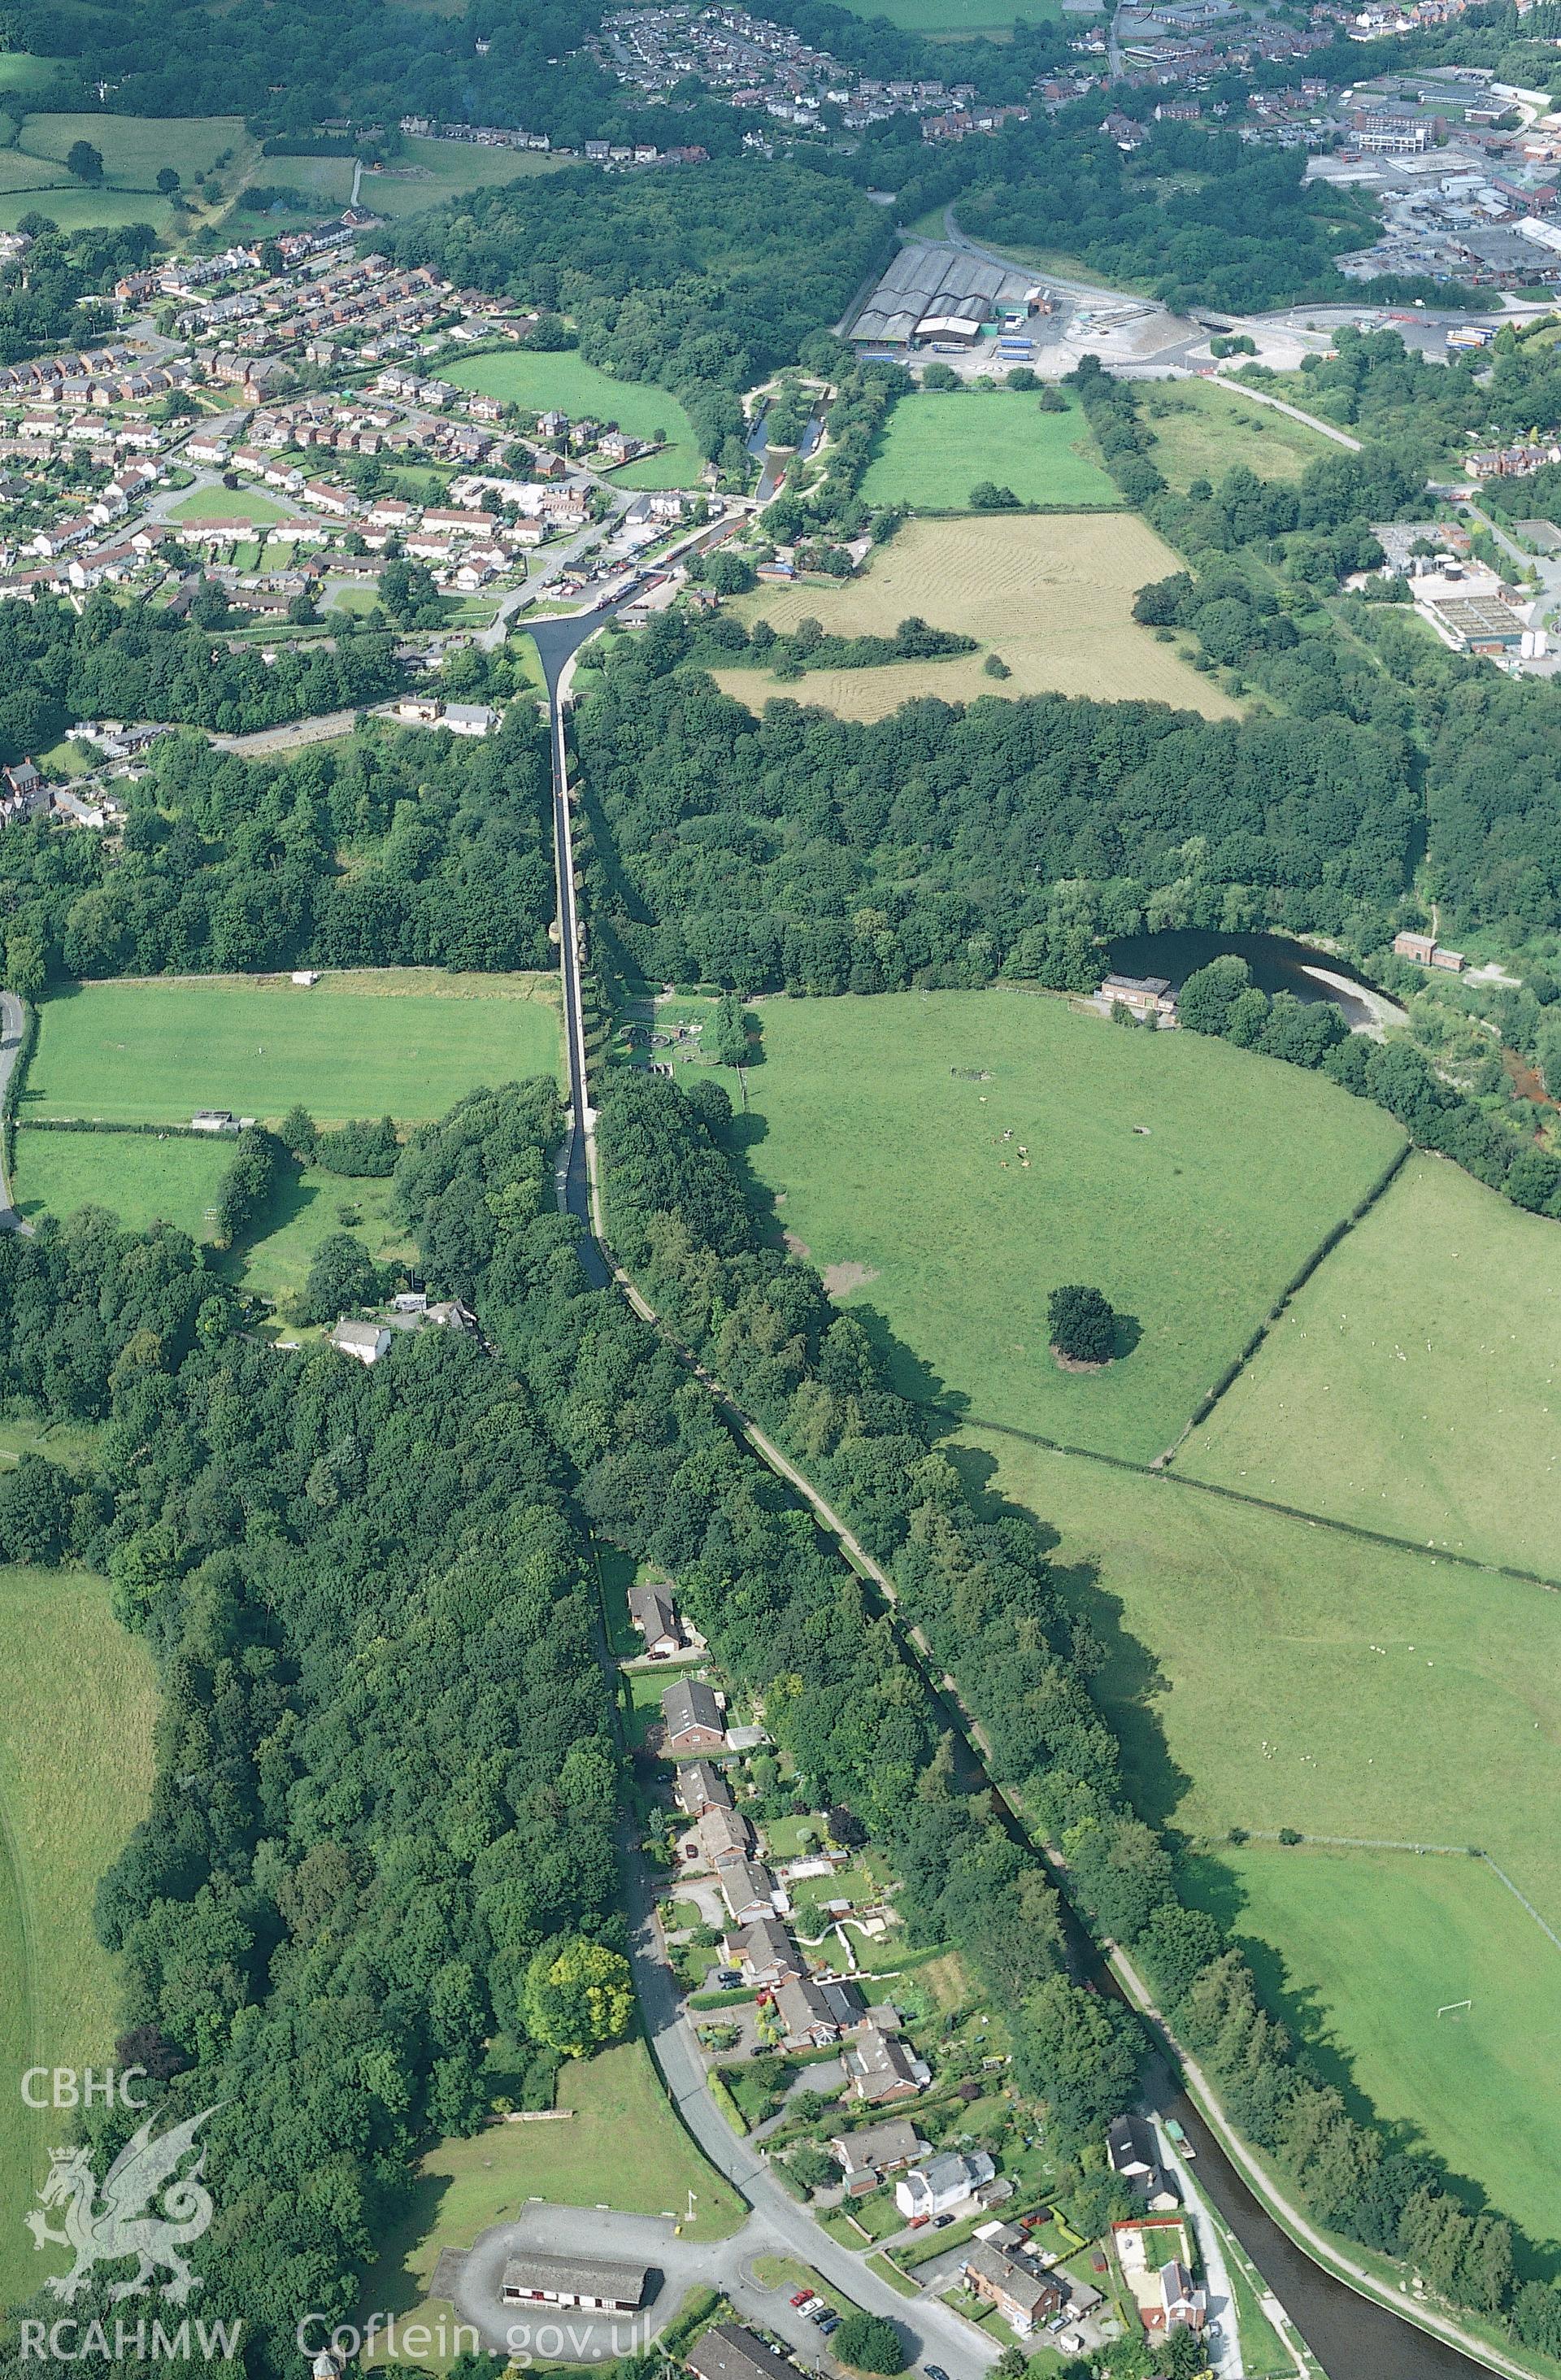 RCAHMW colour oblique aerial photograph of Pontcysyllte Aqueduct taken on 30/07/2004 by Toby Driver